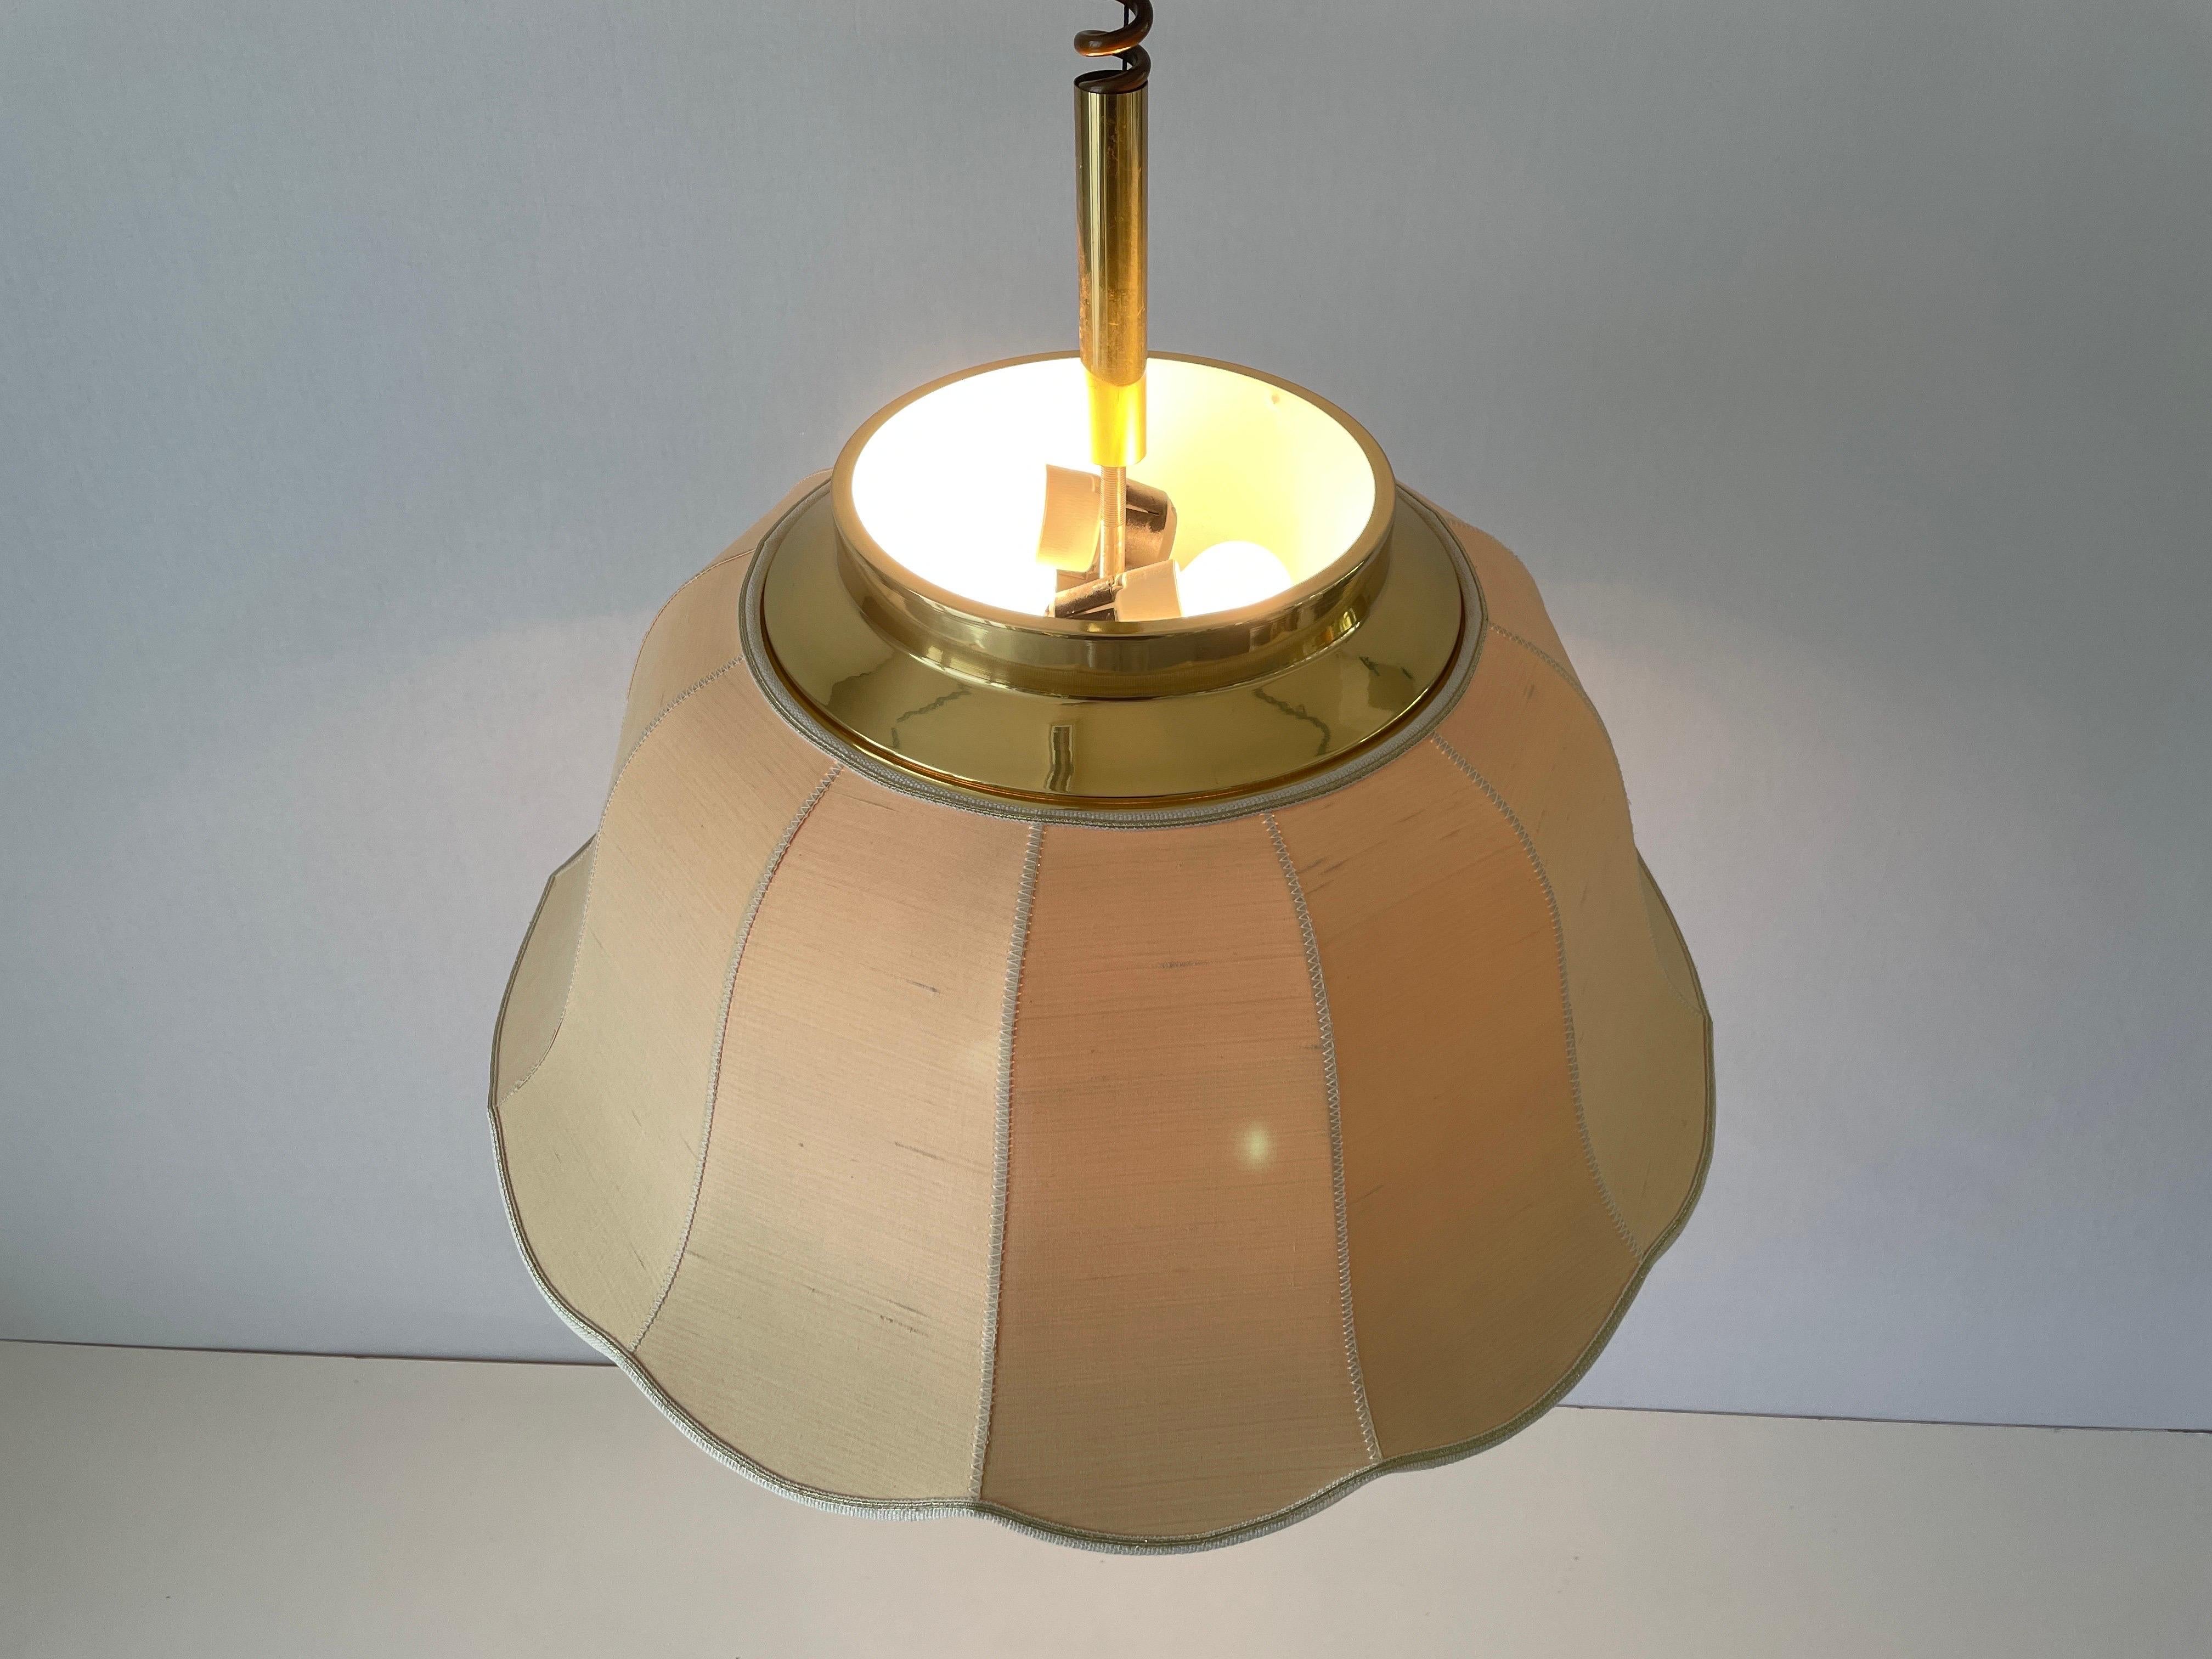 Fabric and Brass 5 socket Adjustable Shade Pendant Lamp by WKR, 1970s, Germany For Sale 9